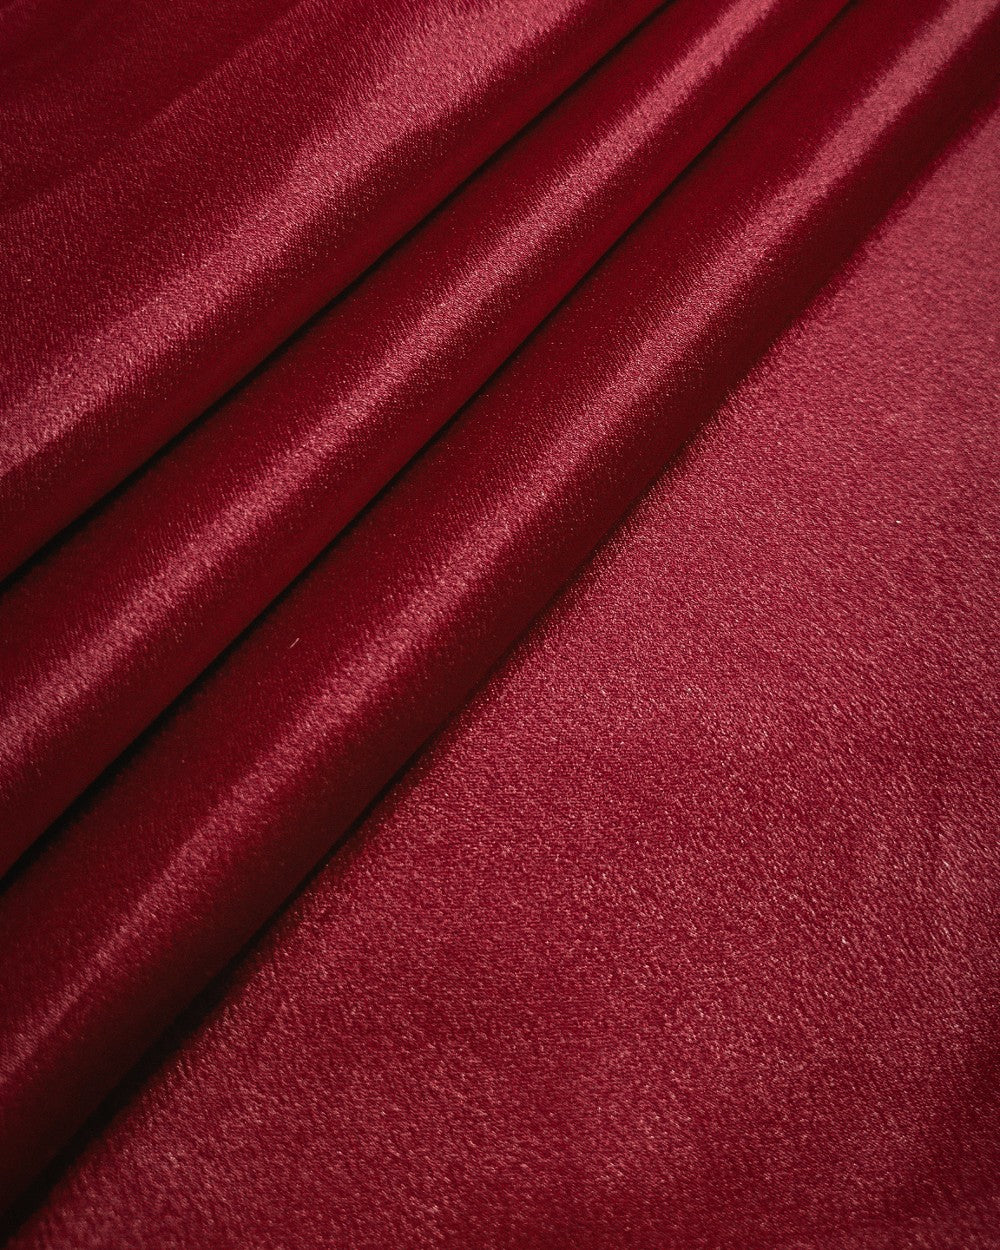 Plain German-Satin Cherry Red Colour 44 Inches Width